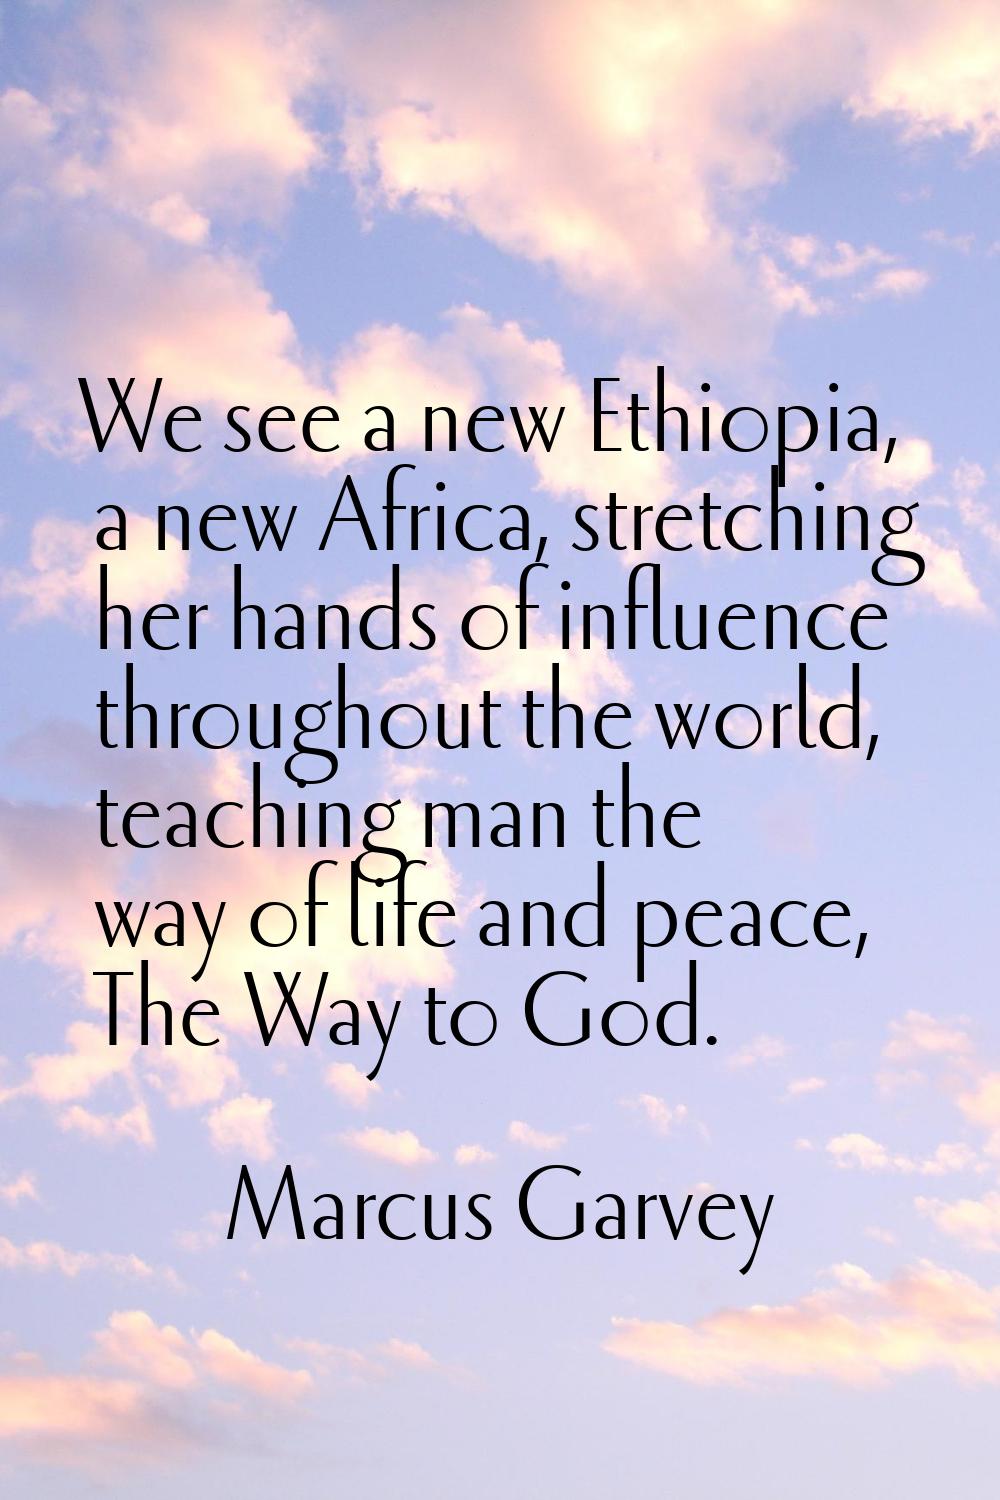 We see a new Ethiopia, a new Africa, stretching her hands of influence throughout the world, teachi